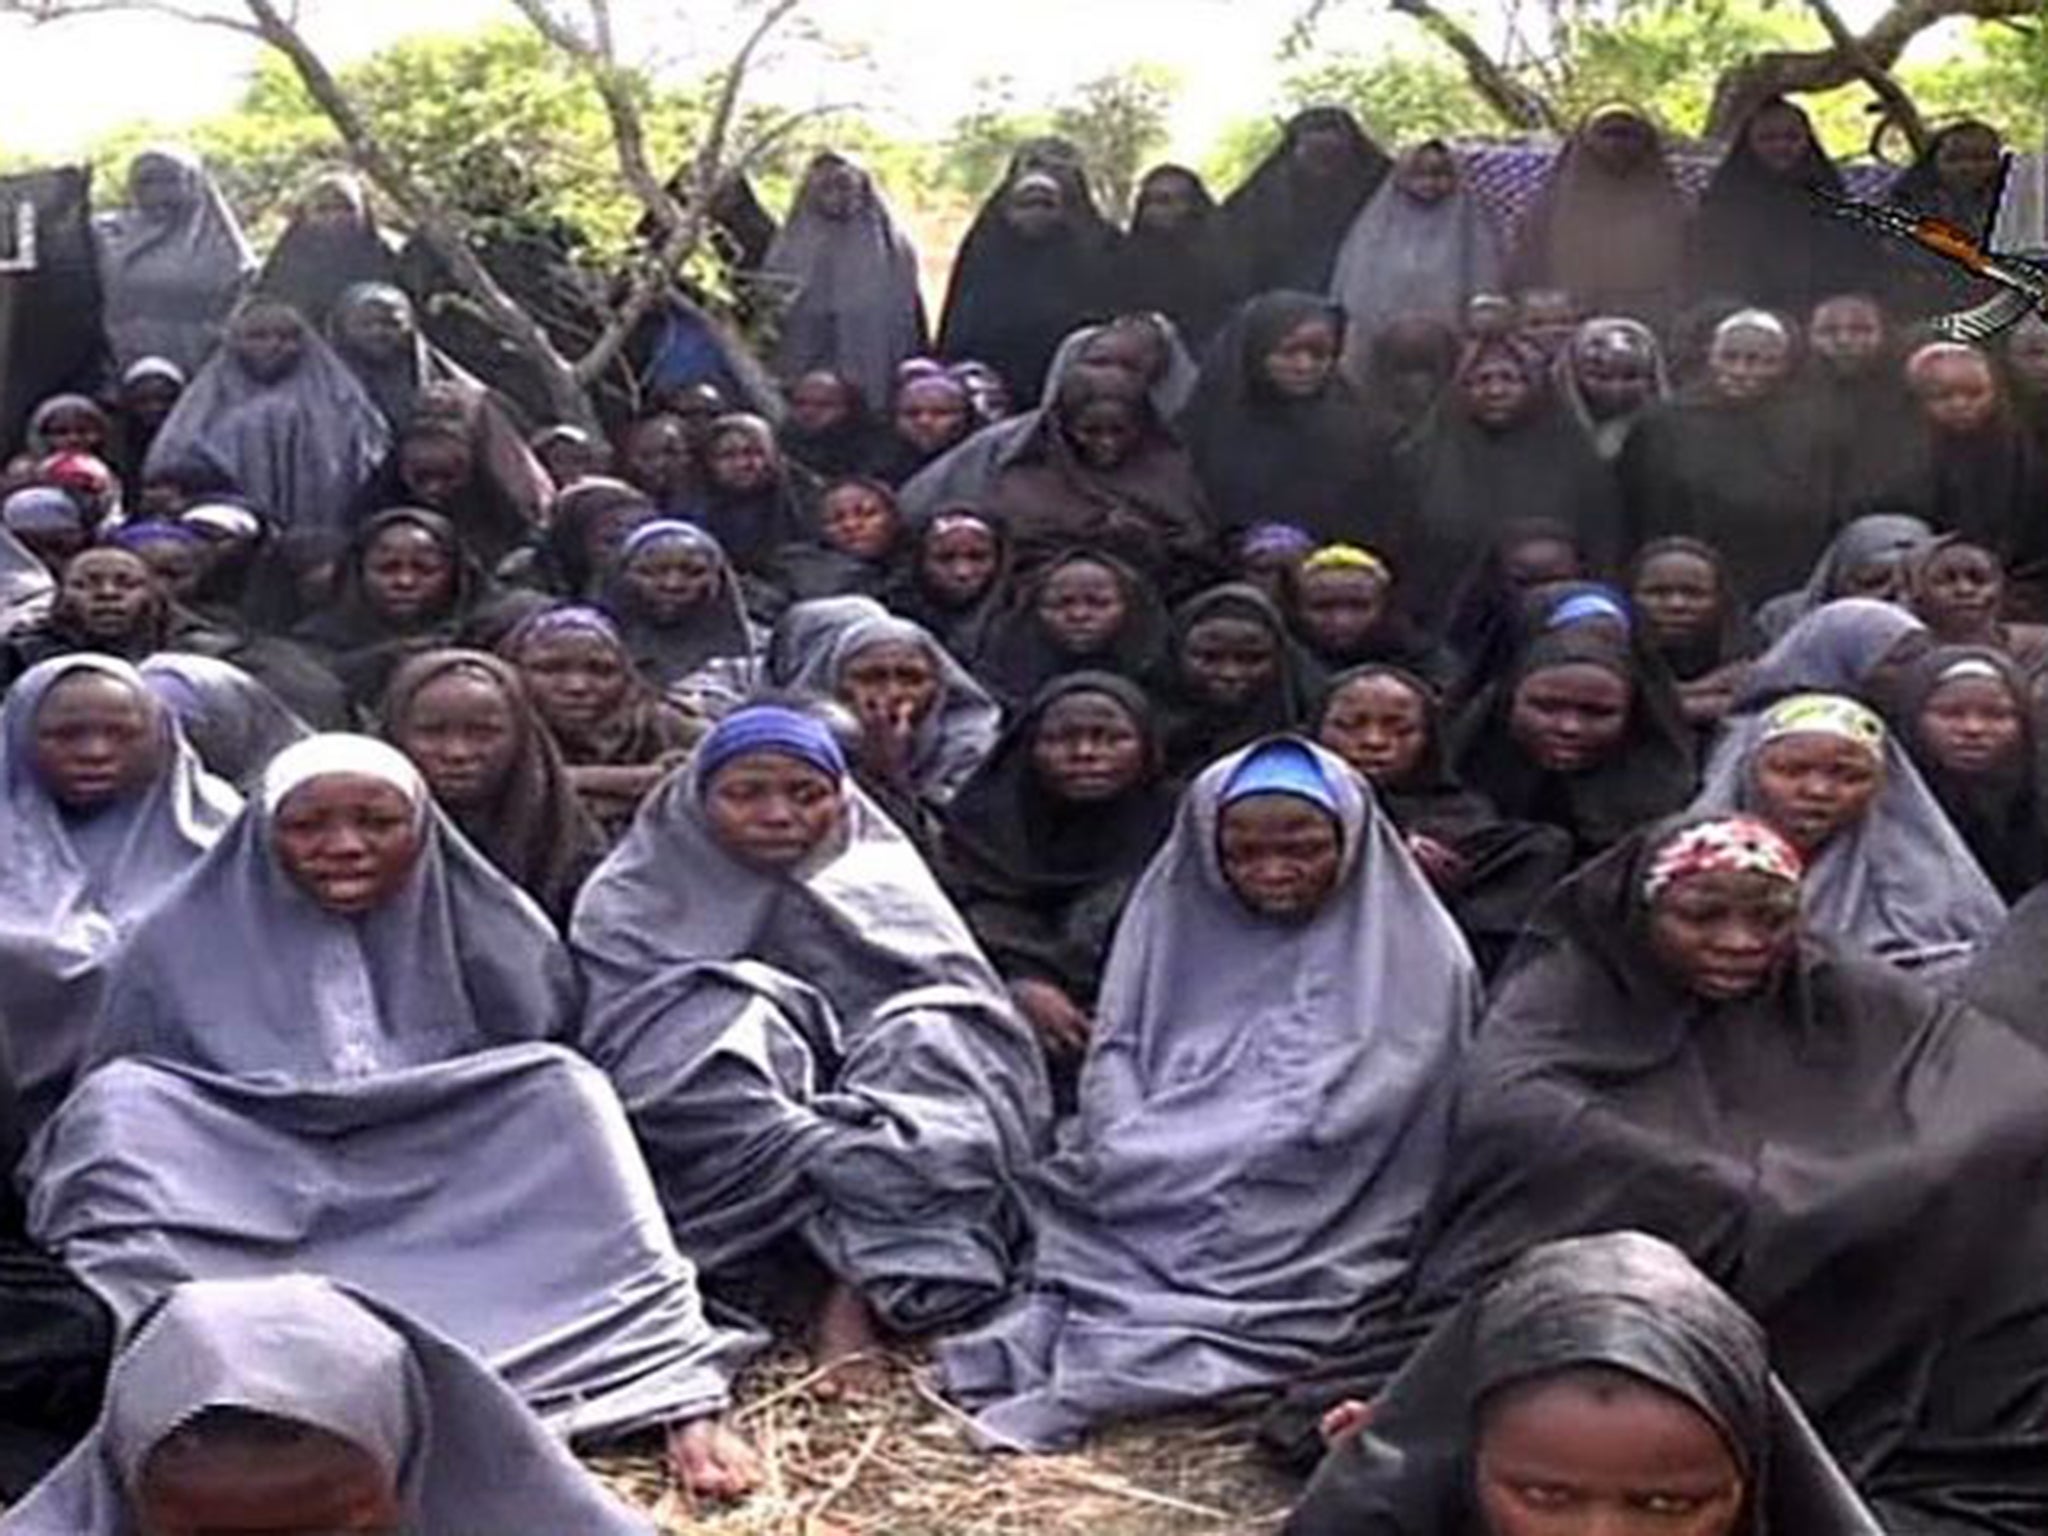 Boko Haram released a video of the kidnapped schoolgirls last year, where they appeared reasonably fit and well in a wooded location, followed by a rant from the group’s leader Abubakar Shekau (